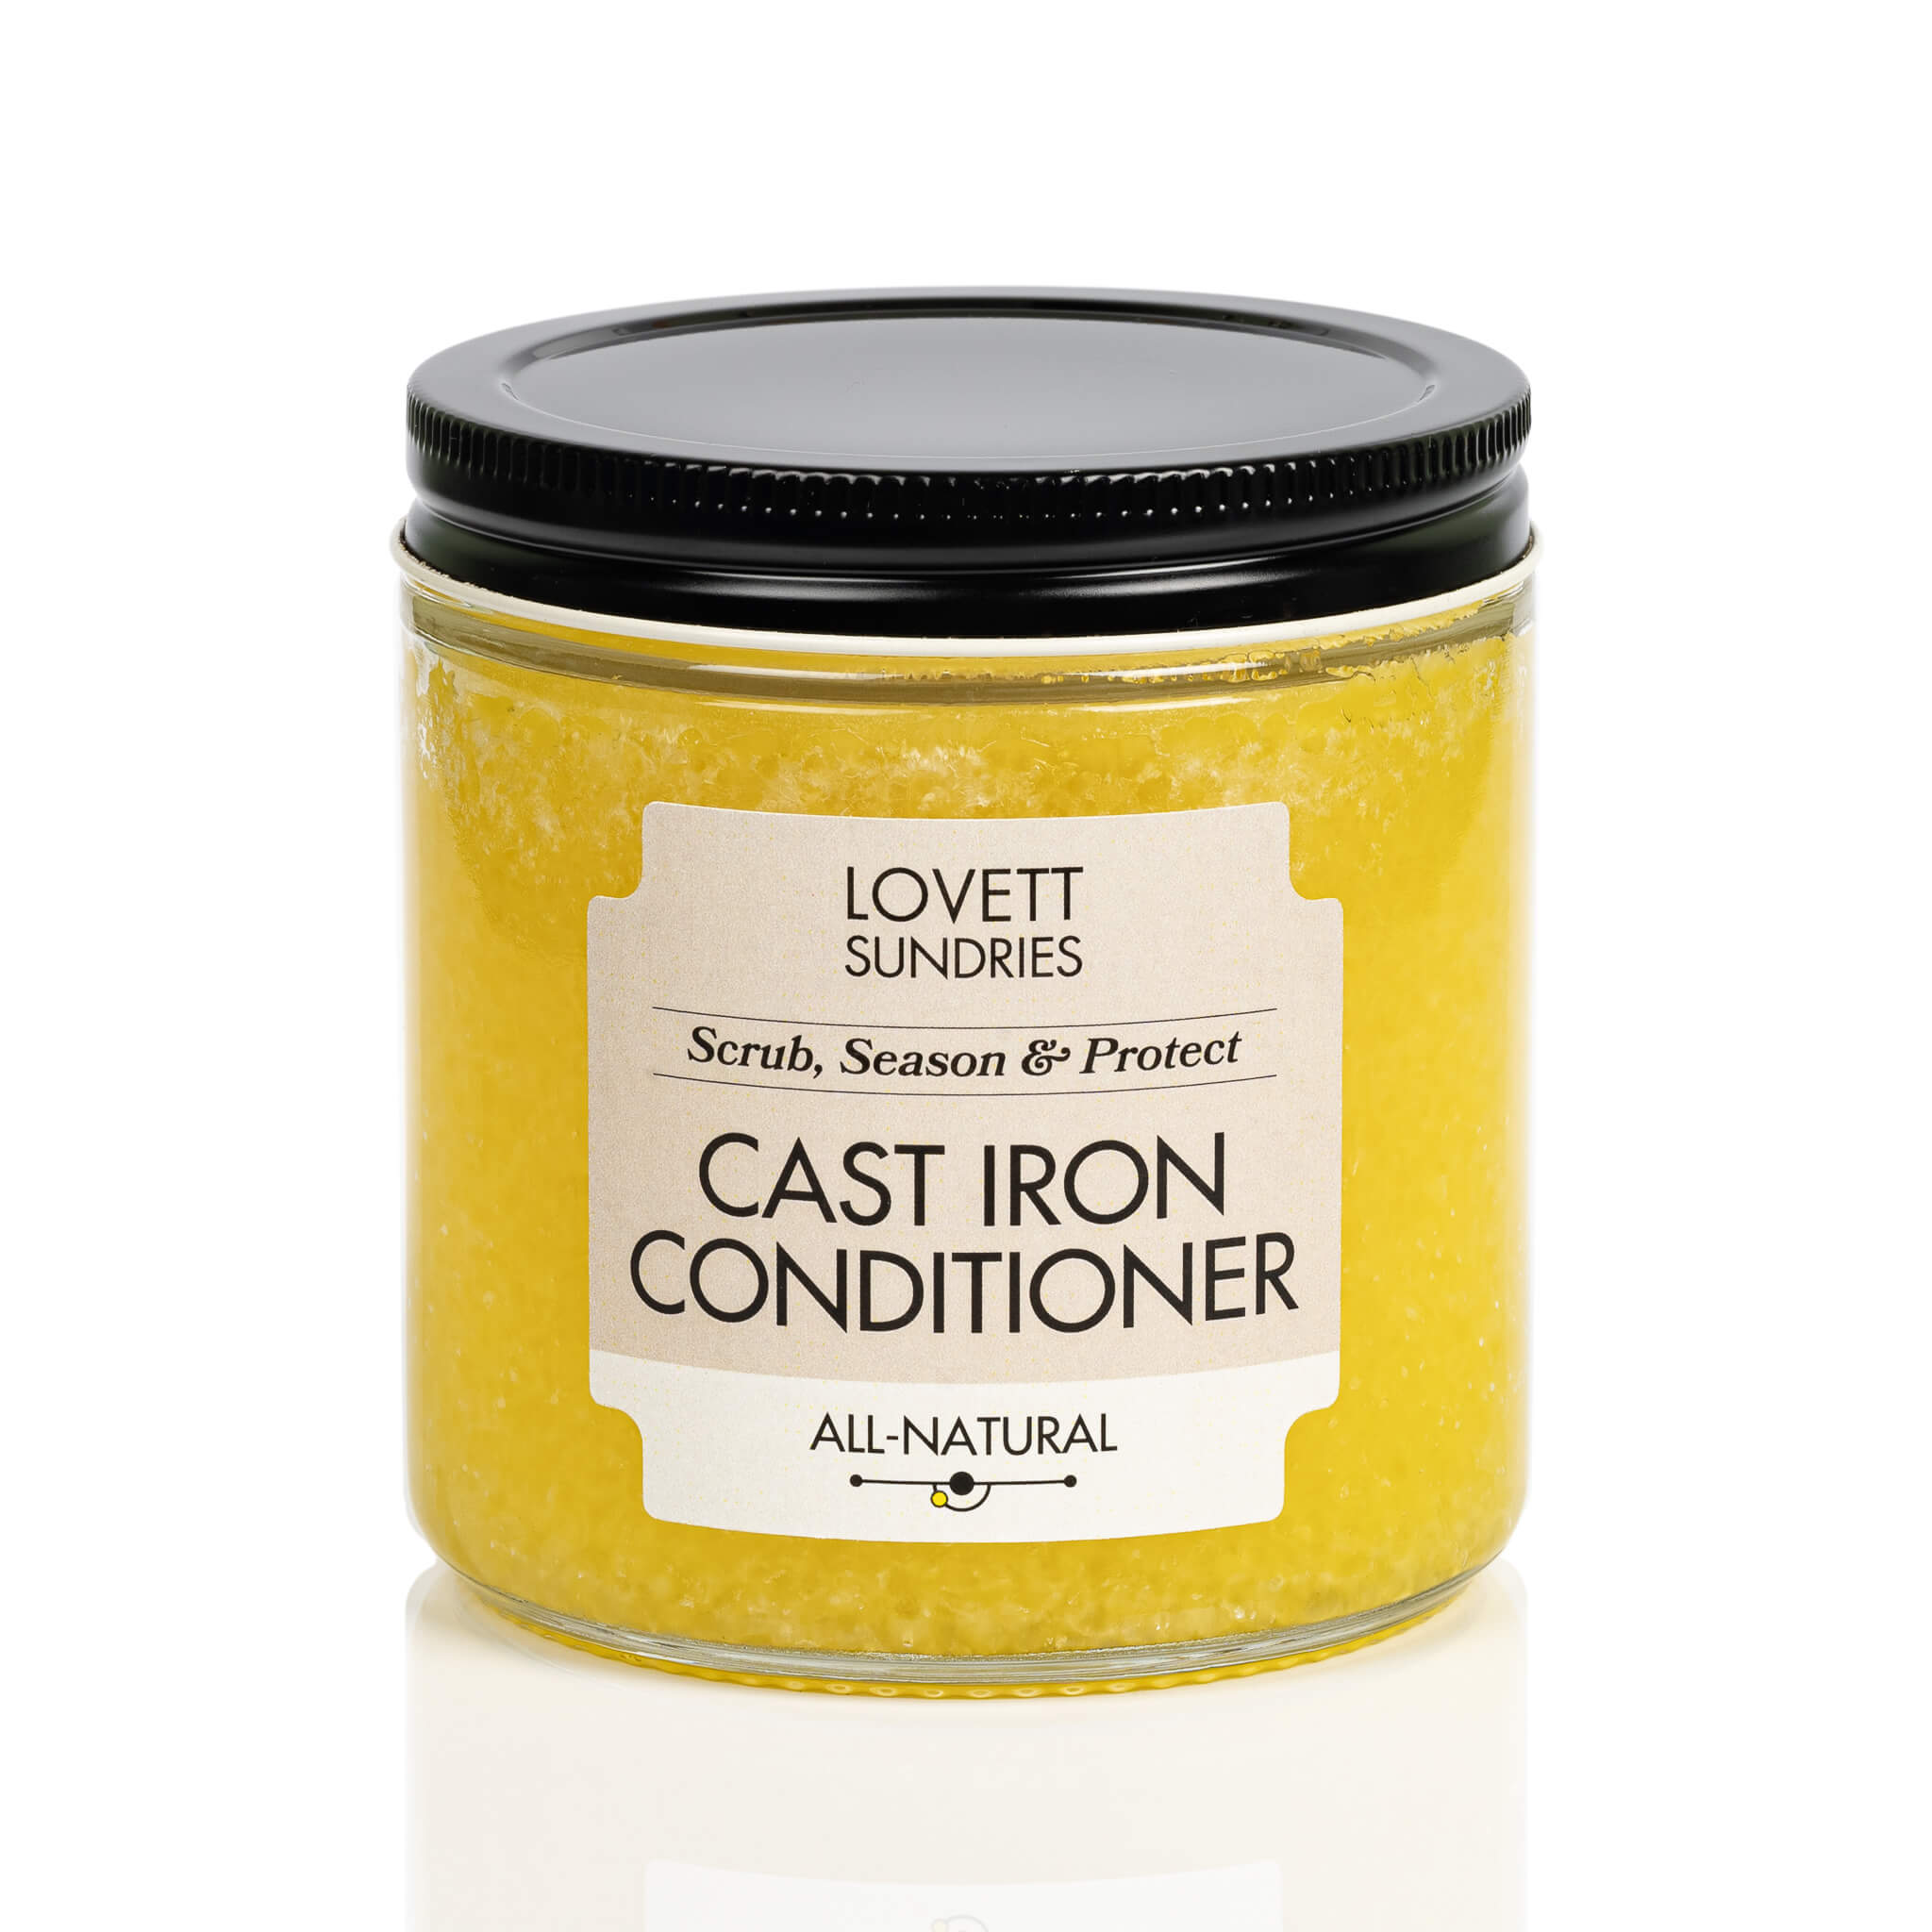 Cast iron conditioner for seasoning, cleaning, and protecting cast iron cookware in a glass jar. 